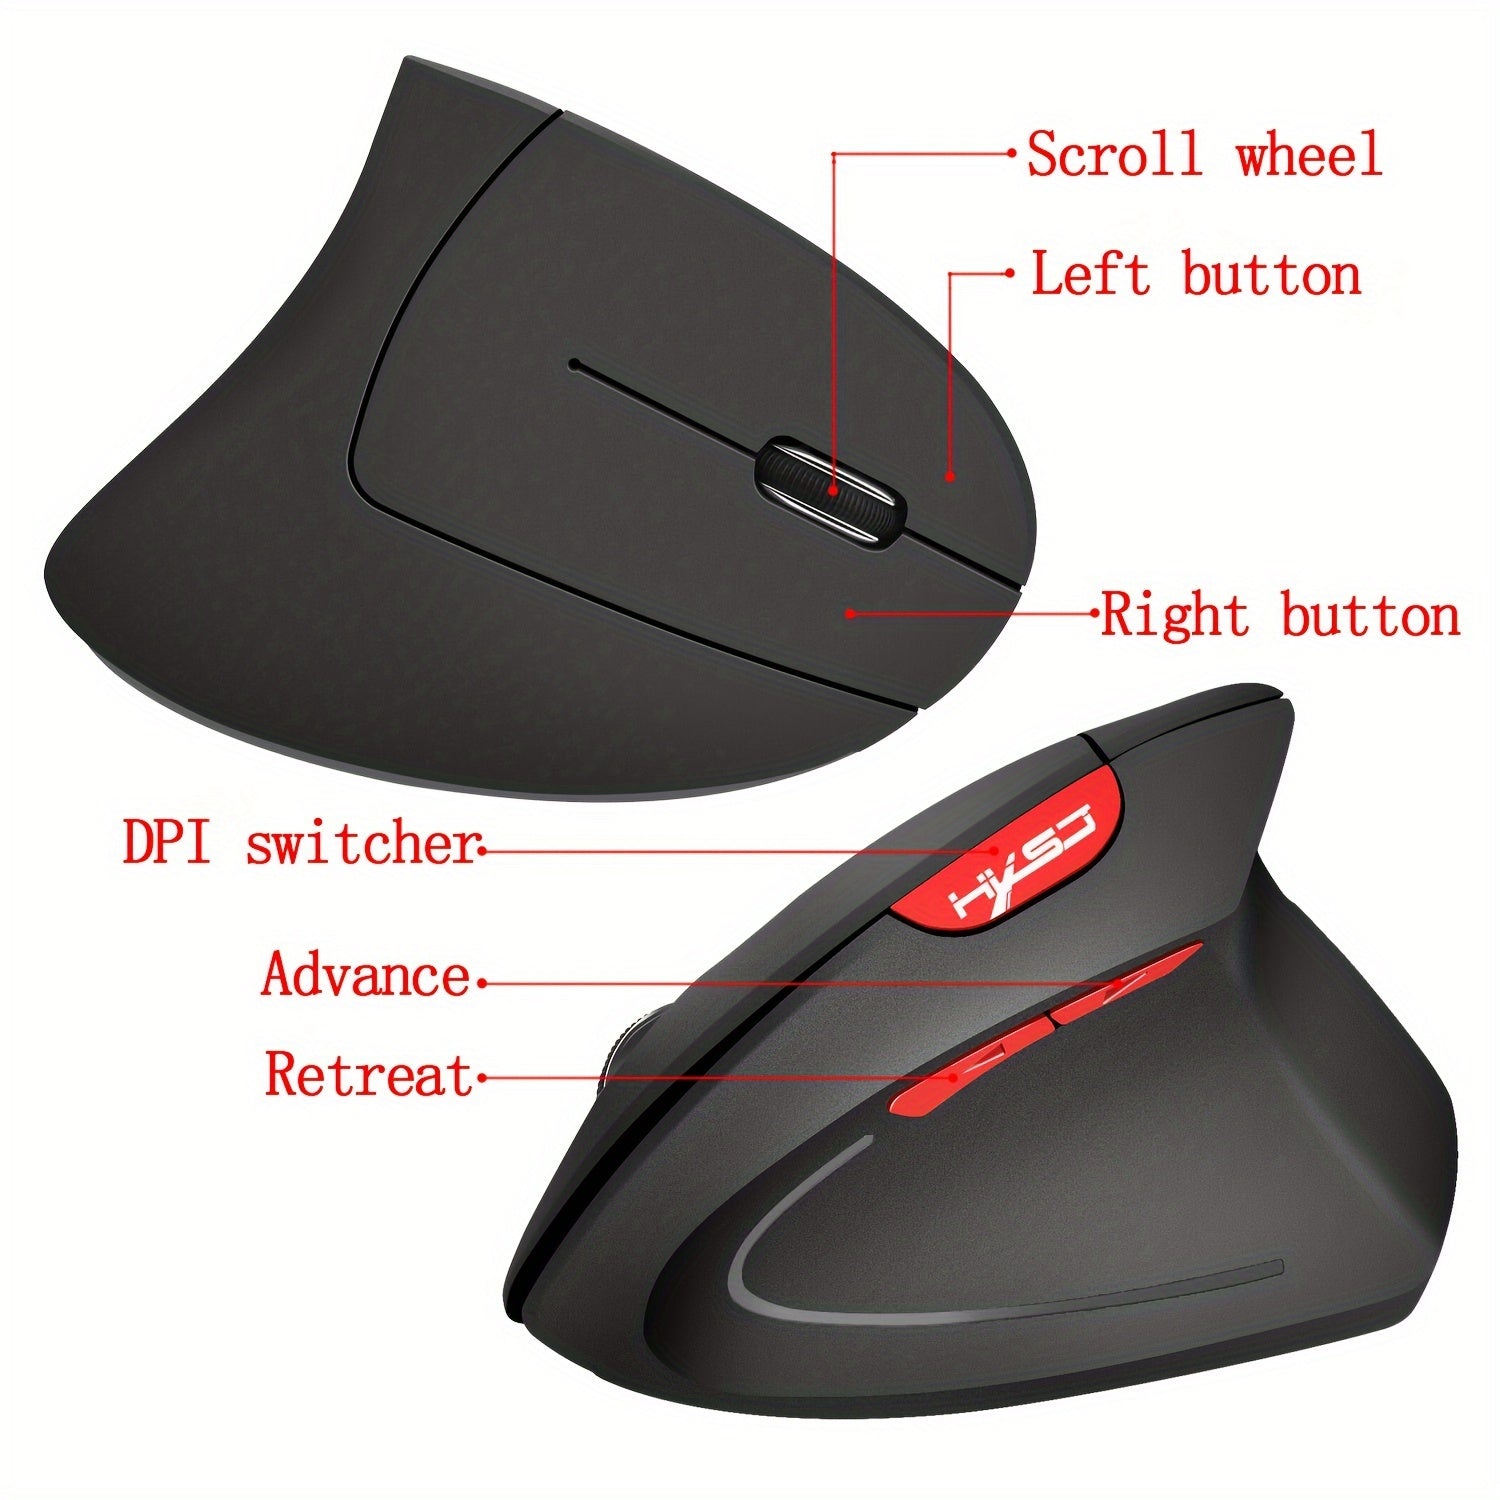 HXSJ Vertical Wireless Mouse Ergonomics 2400DPI Three-speed Adjustable 2.4G Optical Mouse USB Plug And Play Suitable For Home Office